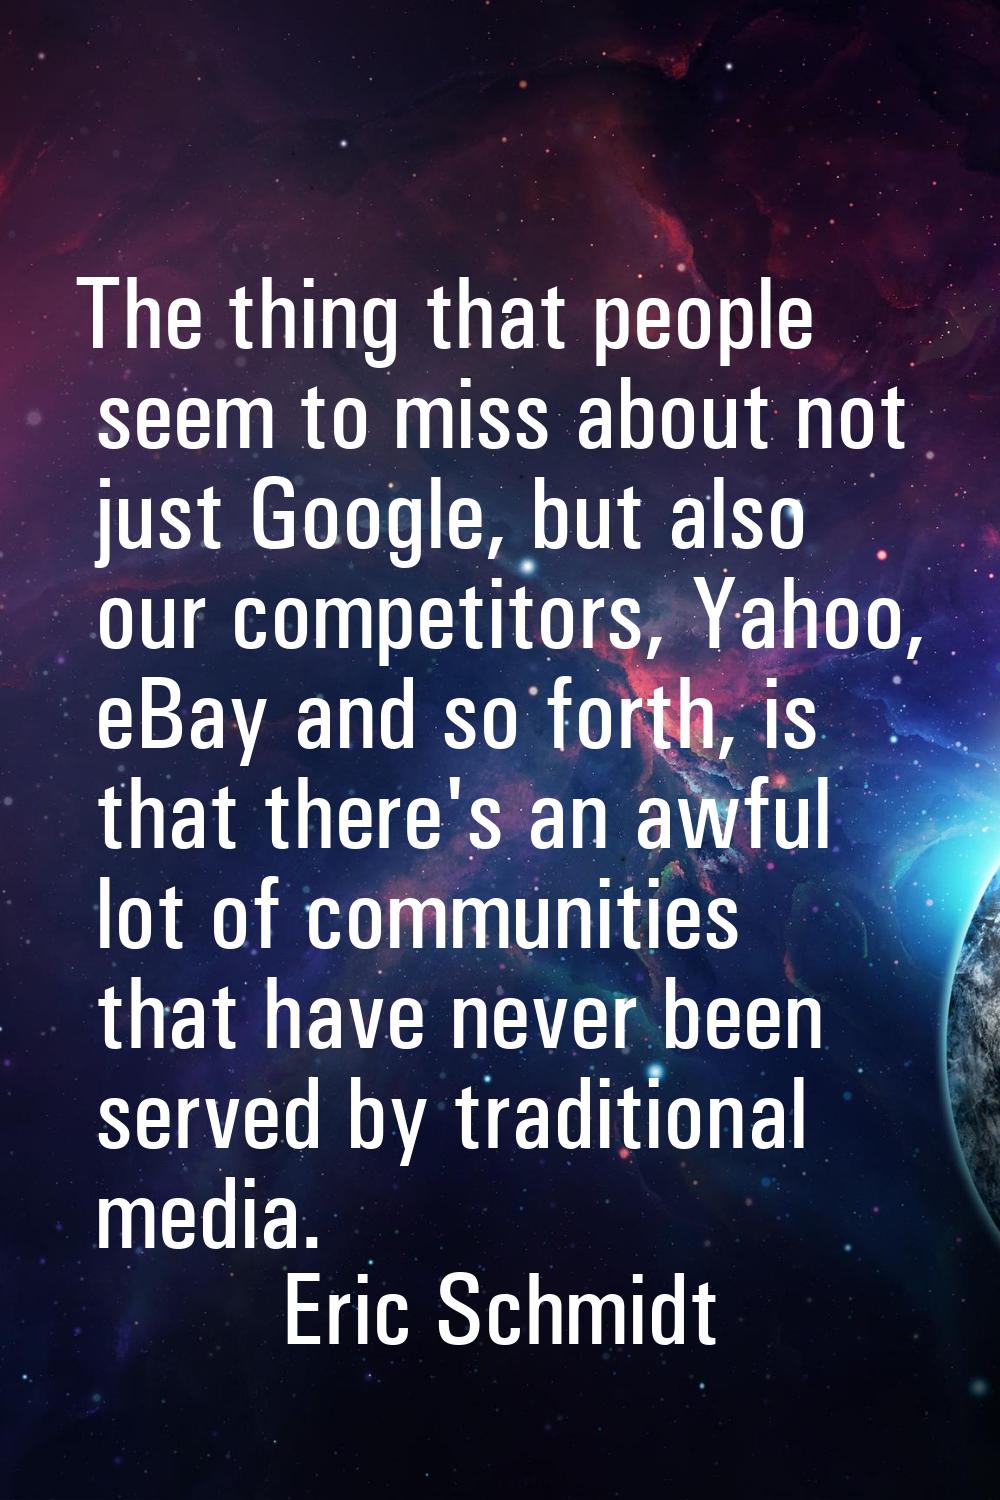 The thing that people seem to miss about not just Google, but also our competitors, Yahoo, eBay and